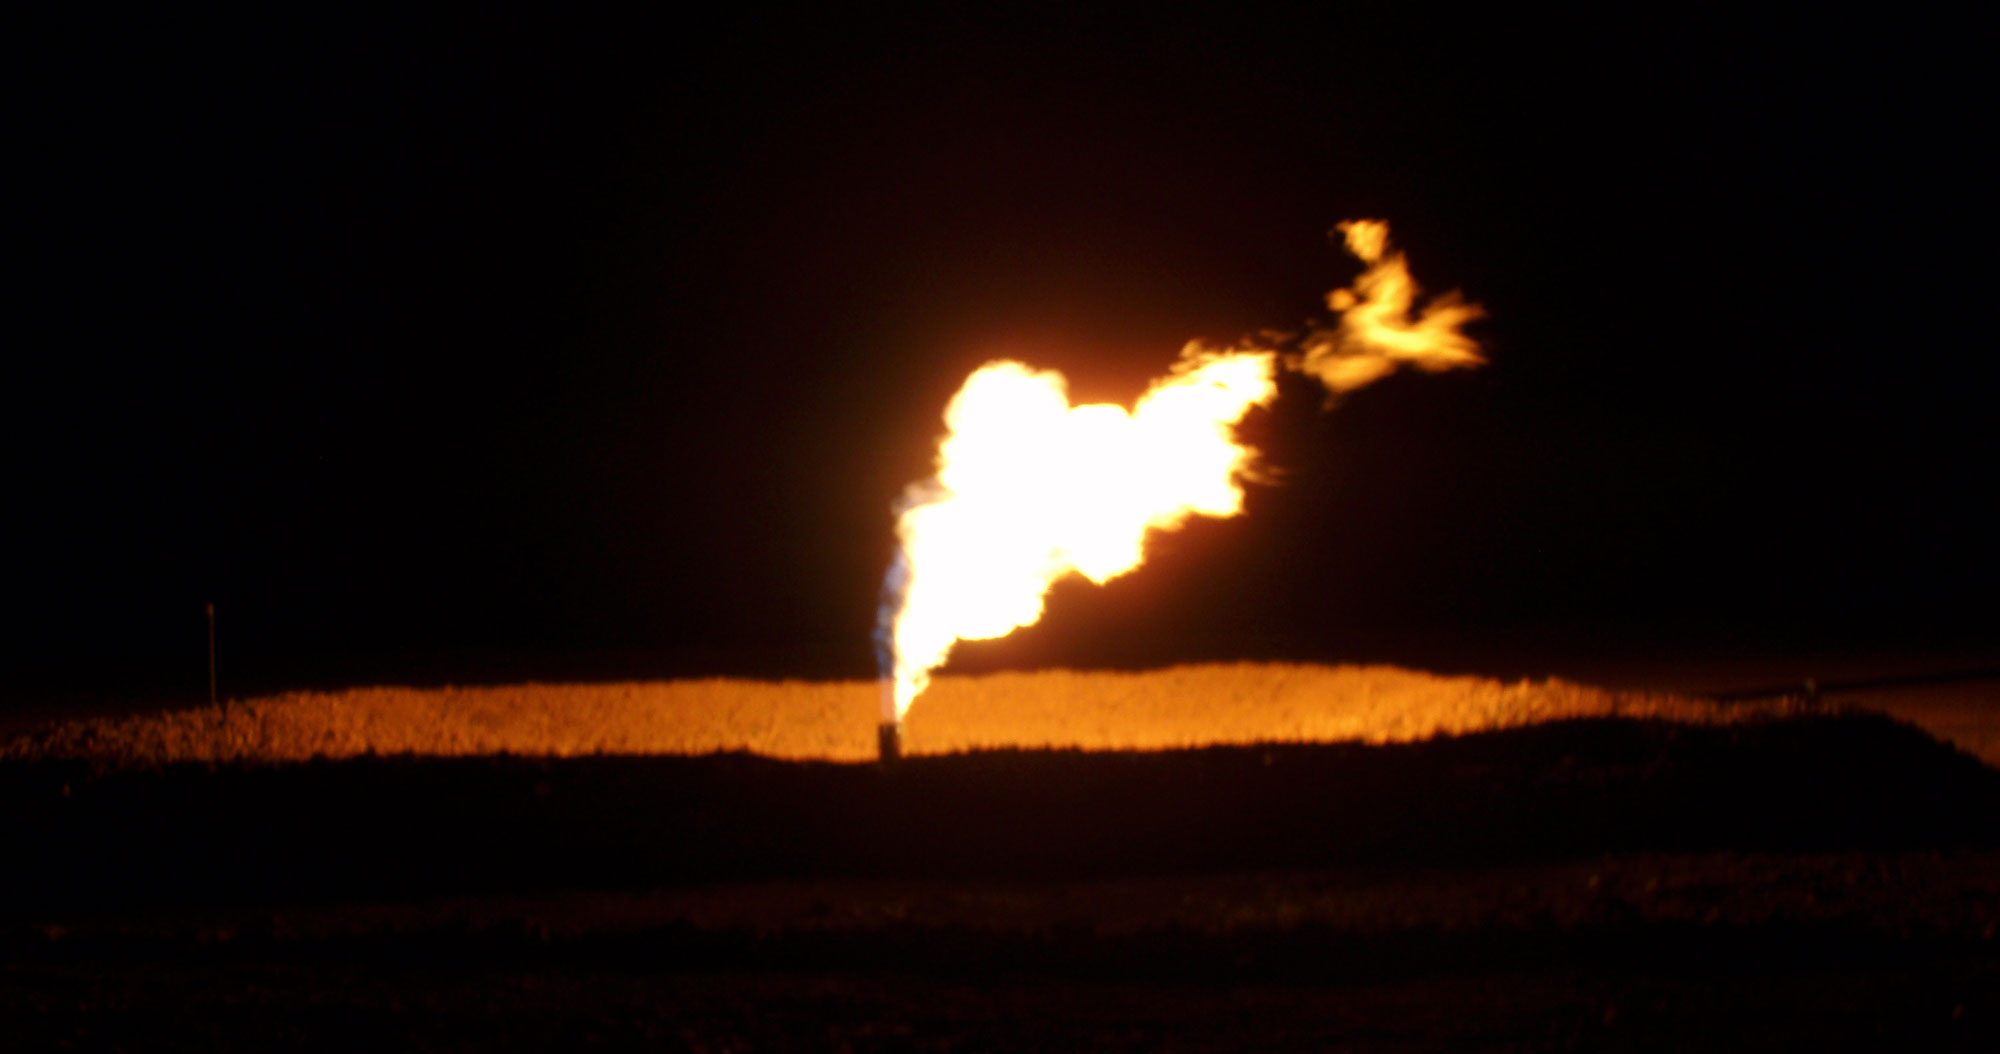 Photograph of a gas flare in the Bakken Formation of North Dakota at night. The photo shows flame come from the end of a pipe. The remainder of the landscape is mostly dark.